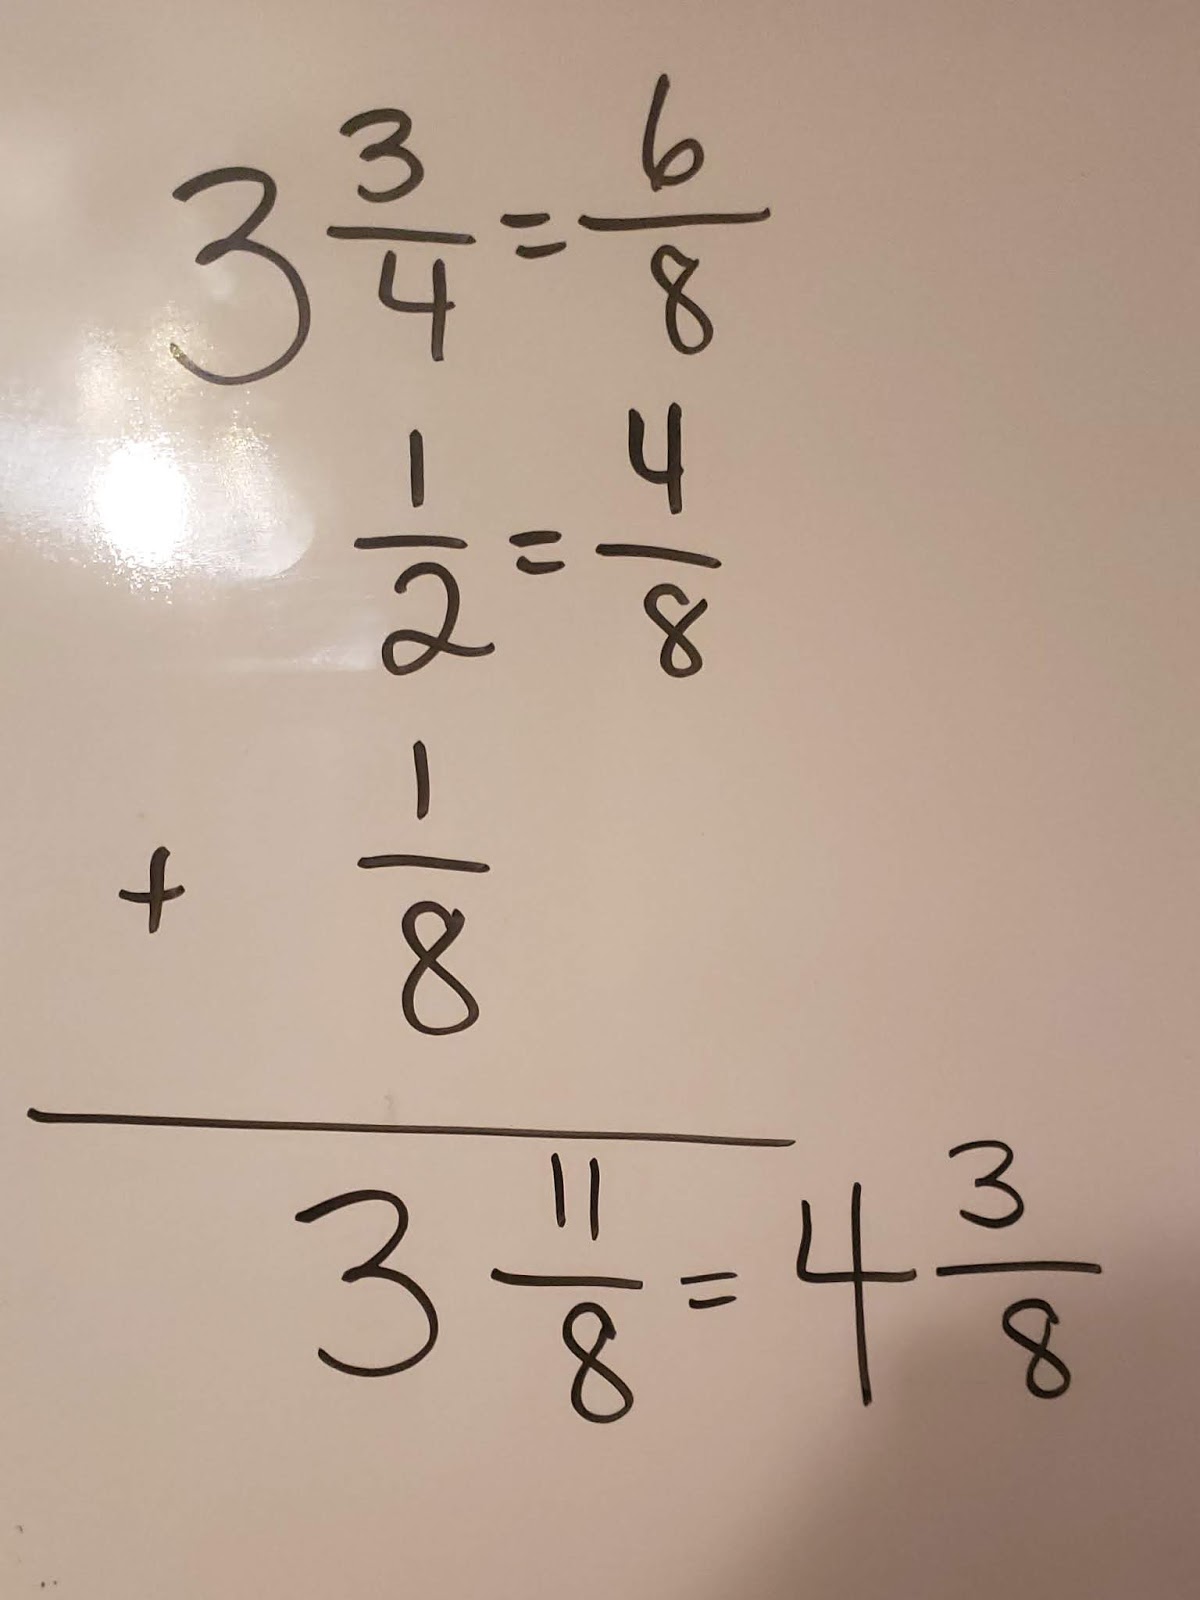 Worksheets For Multiplying Mixed Numbers